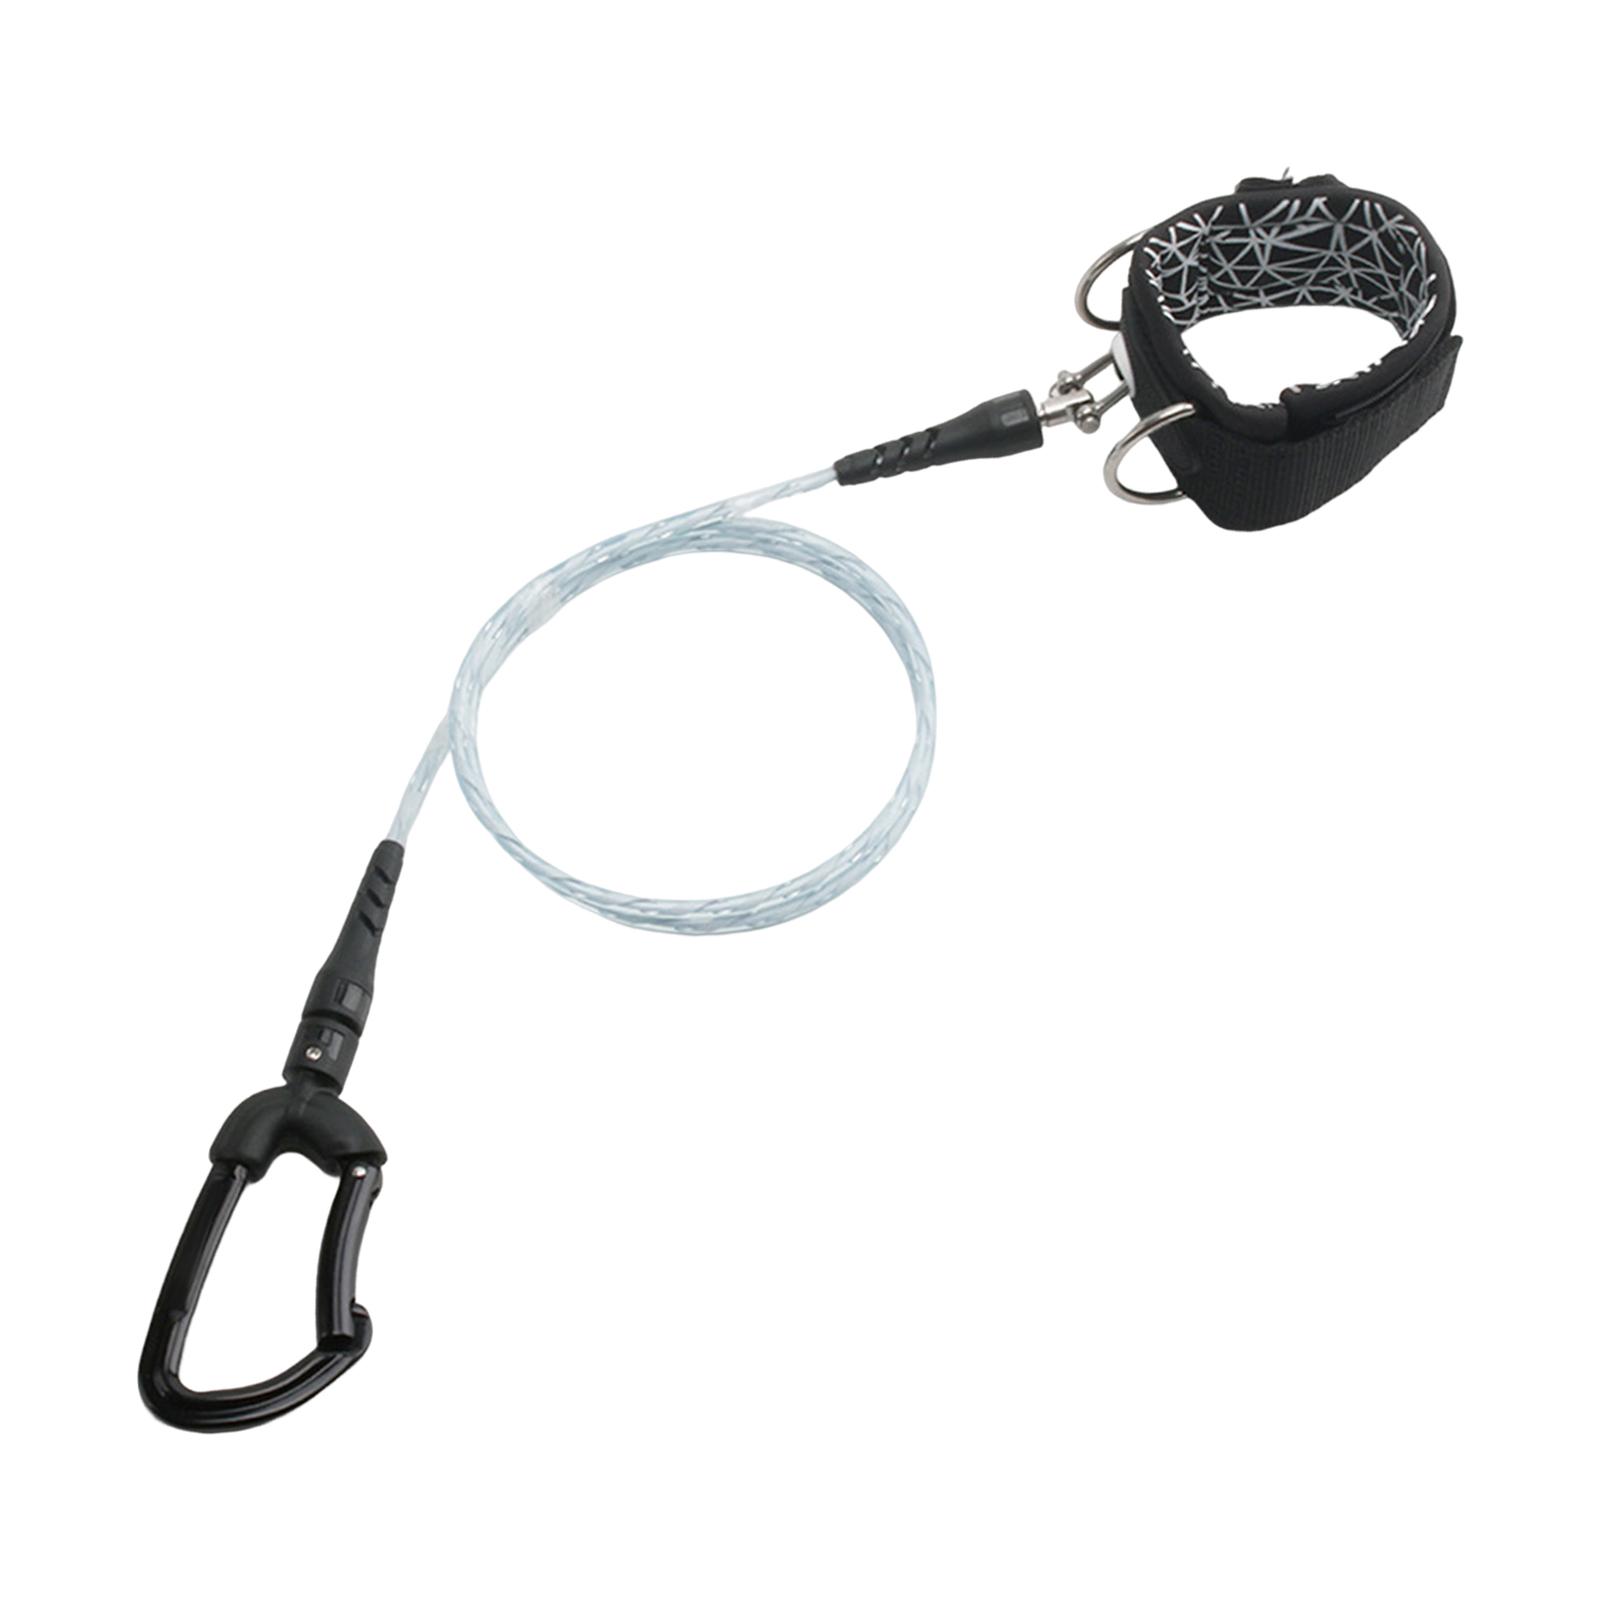 Freediving Lanyard Leash Diving Safety Rope for Water Sport Freediving Gear